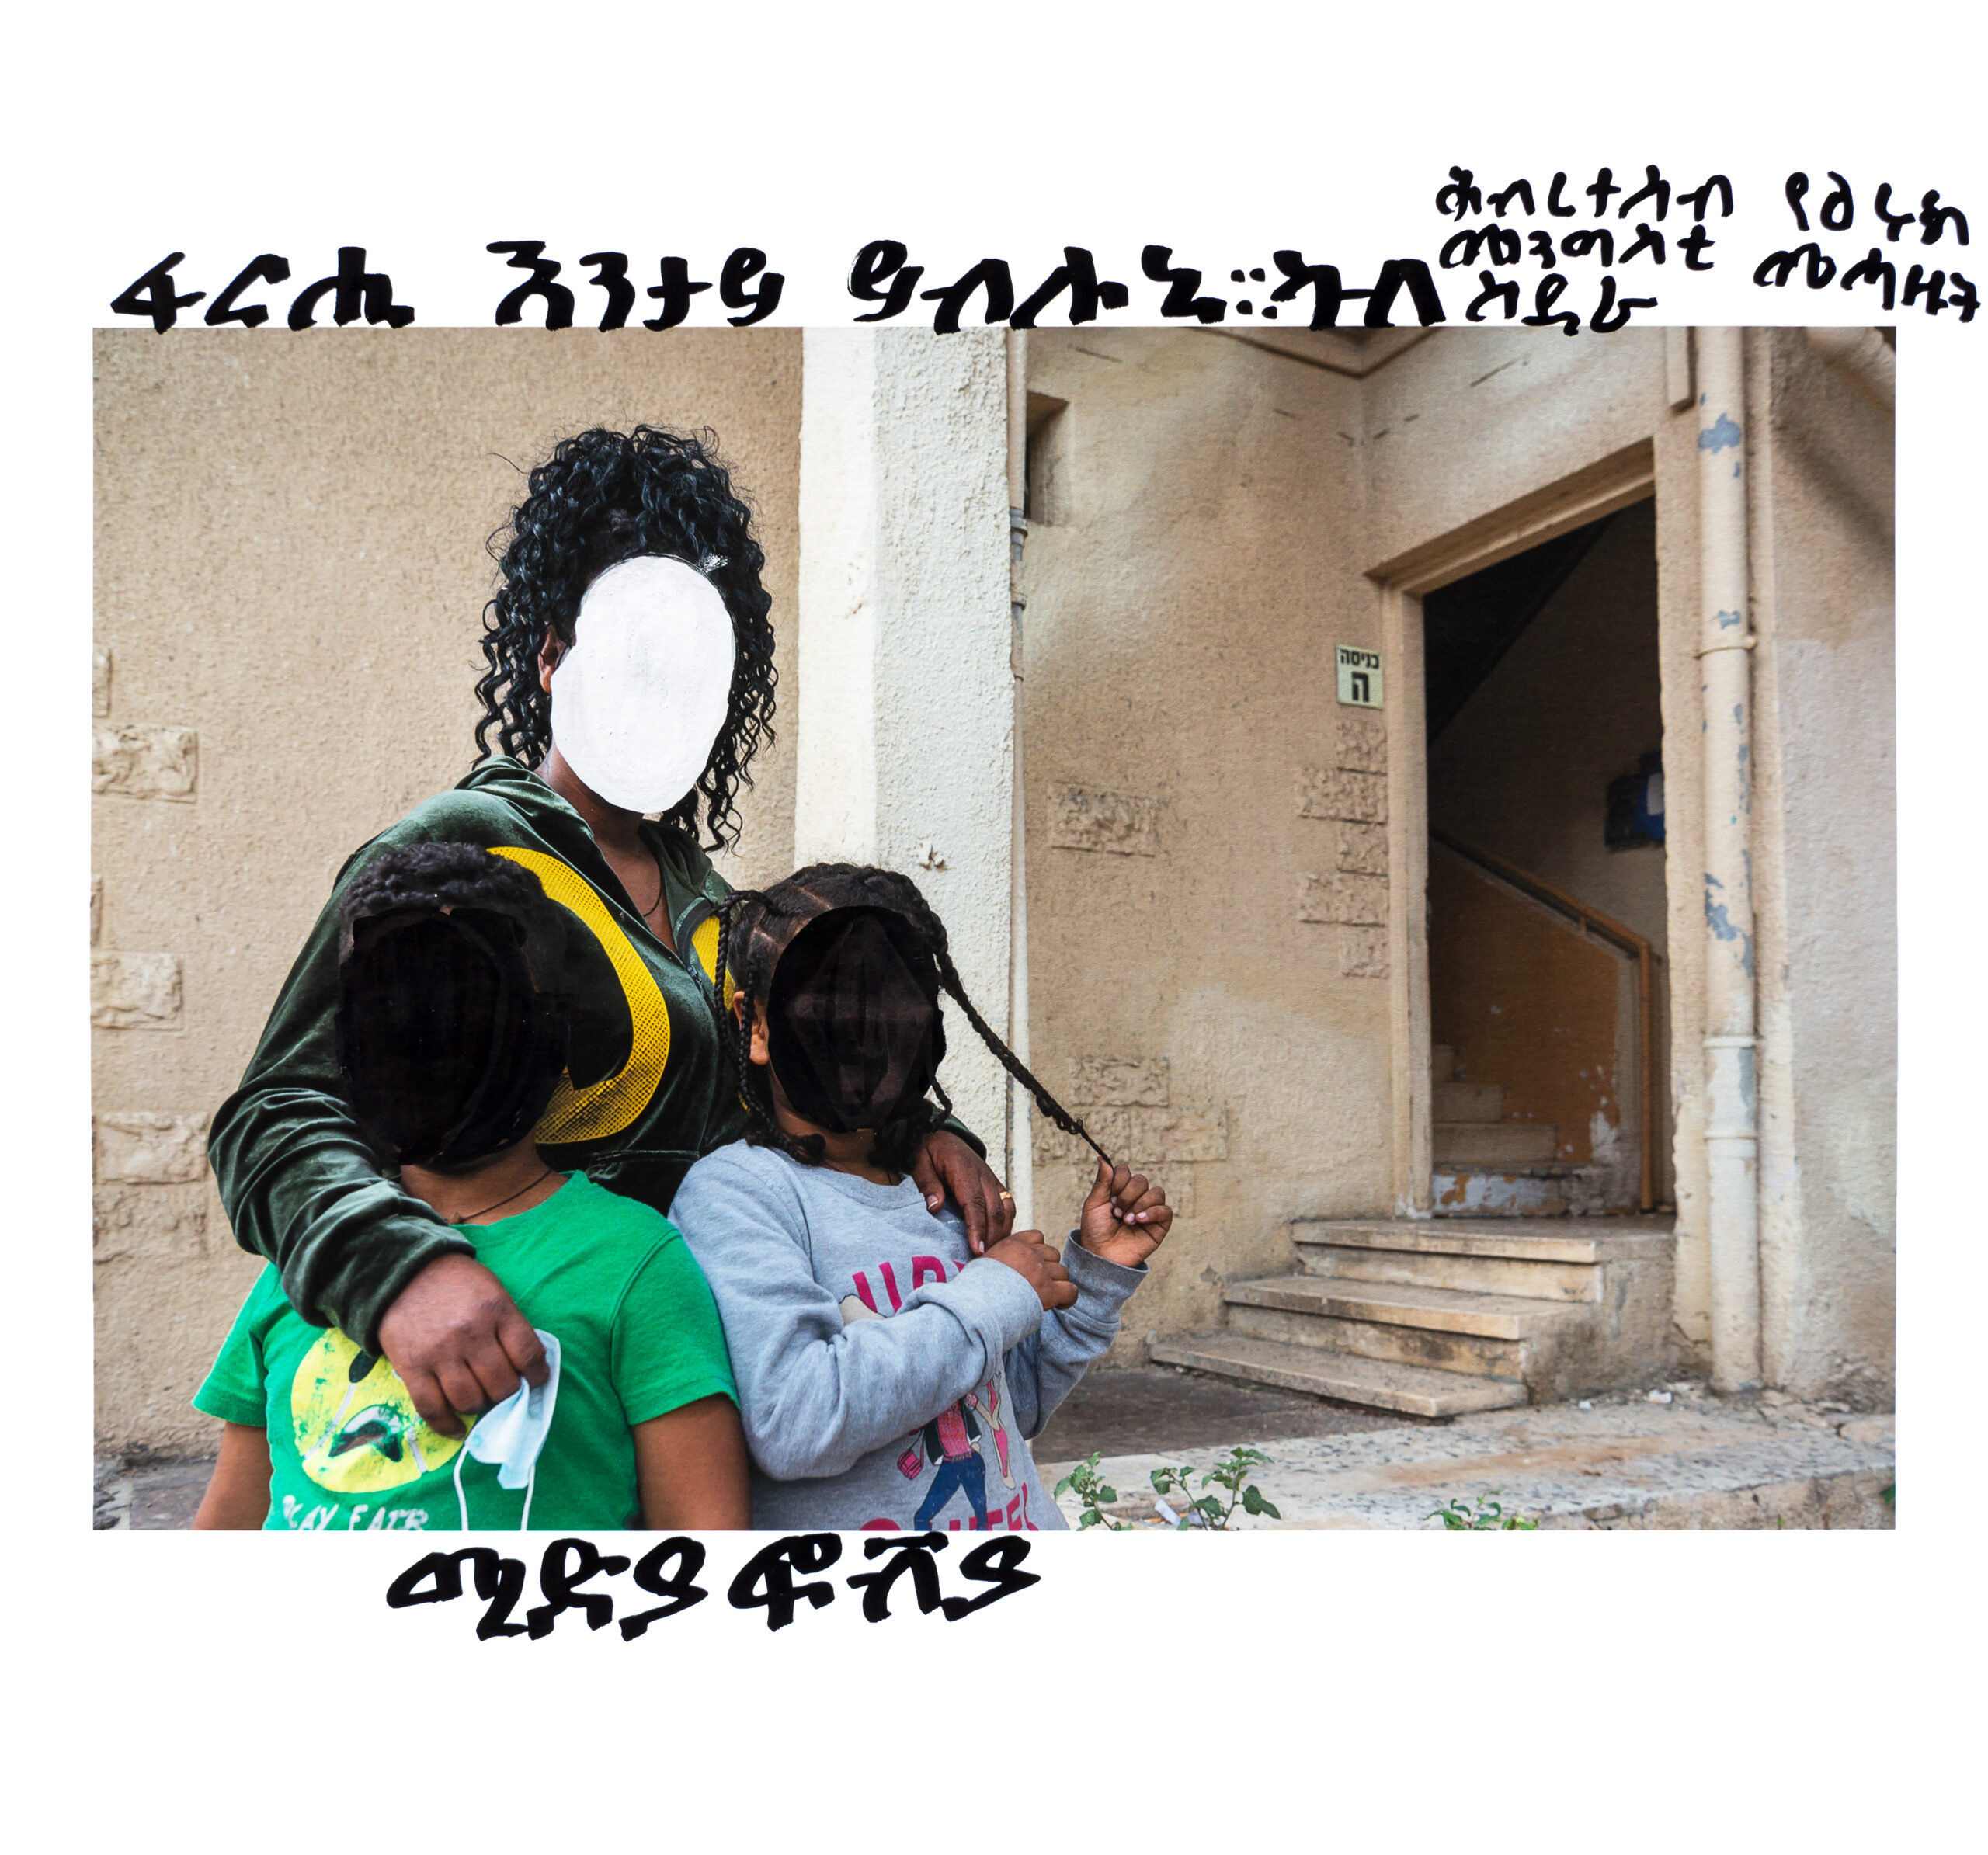 Esther (not her real name) stands with two of her children next to their apartment on March 31, 2021. Because of the security concerns and danger to her family in Eritrea, Esther chose to draw over her face.